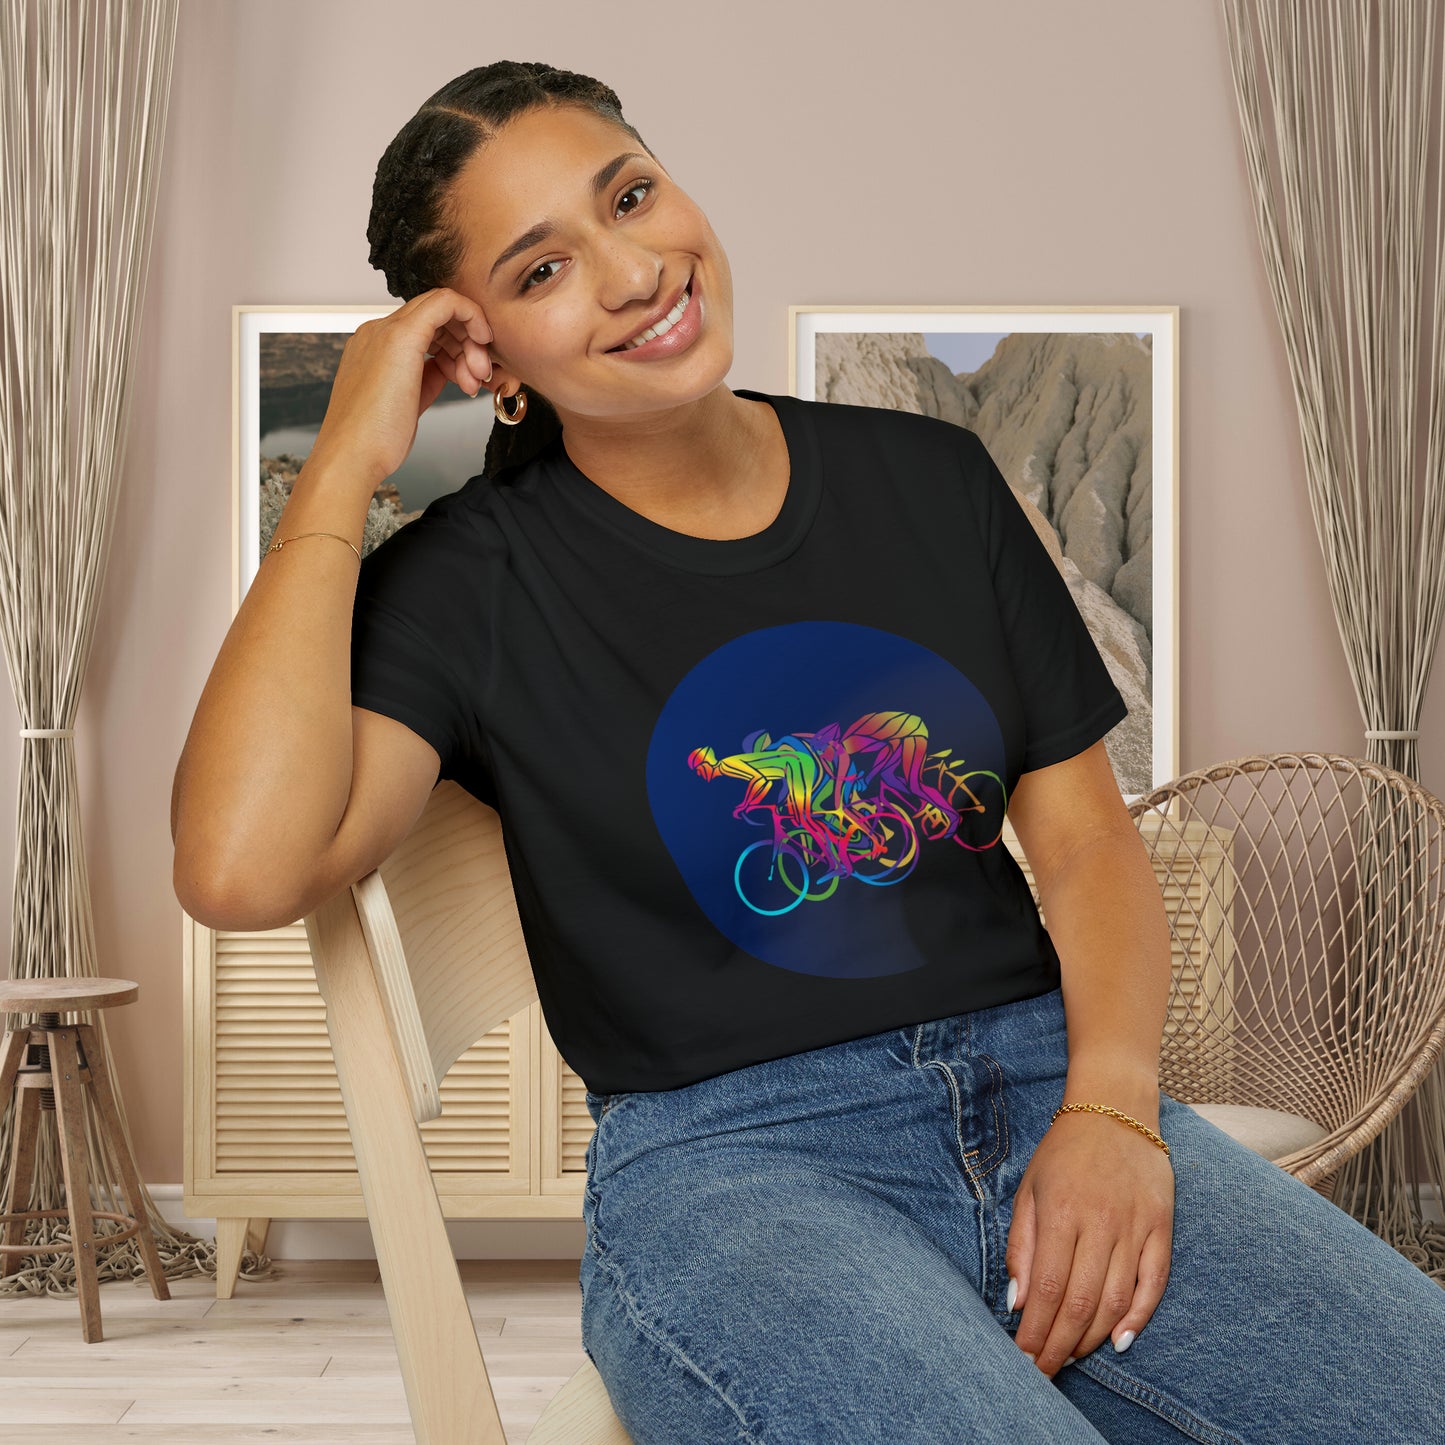 Fun and colorful biker inspired Unisex Softstyle T-Shirt.